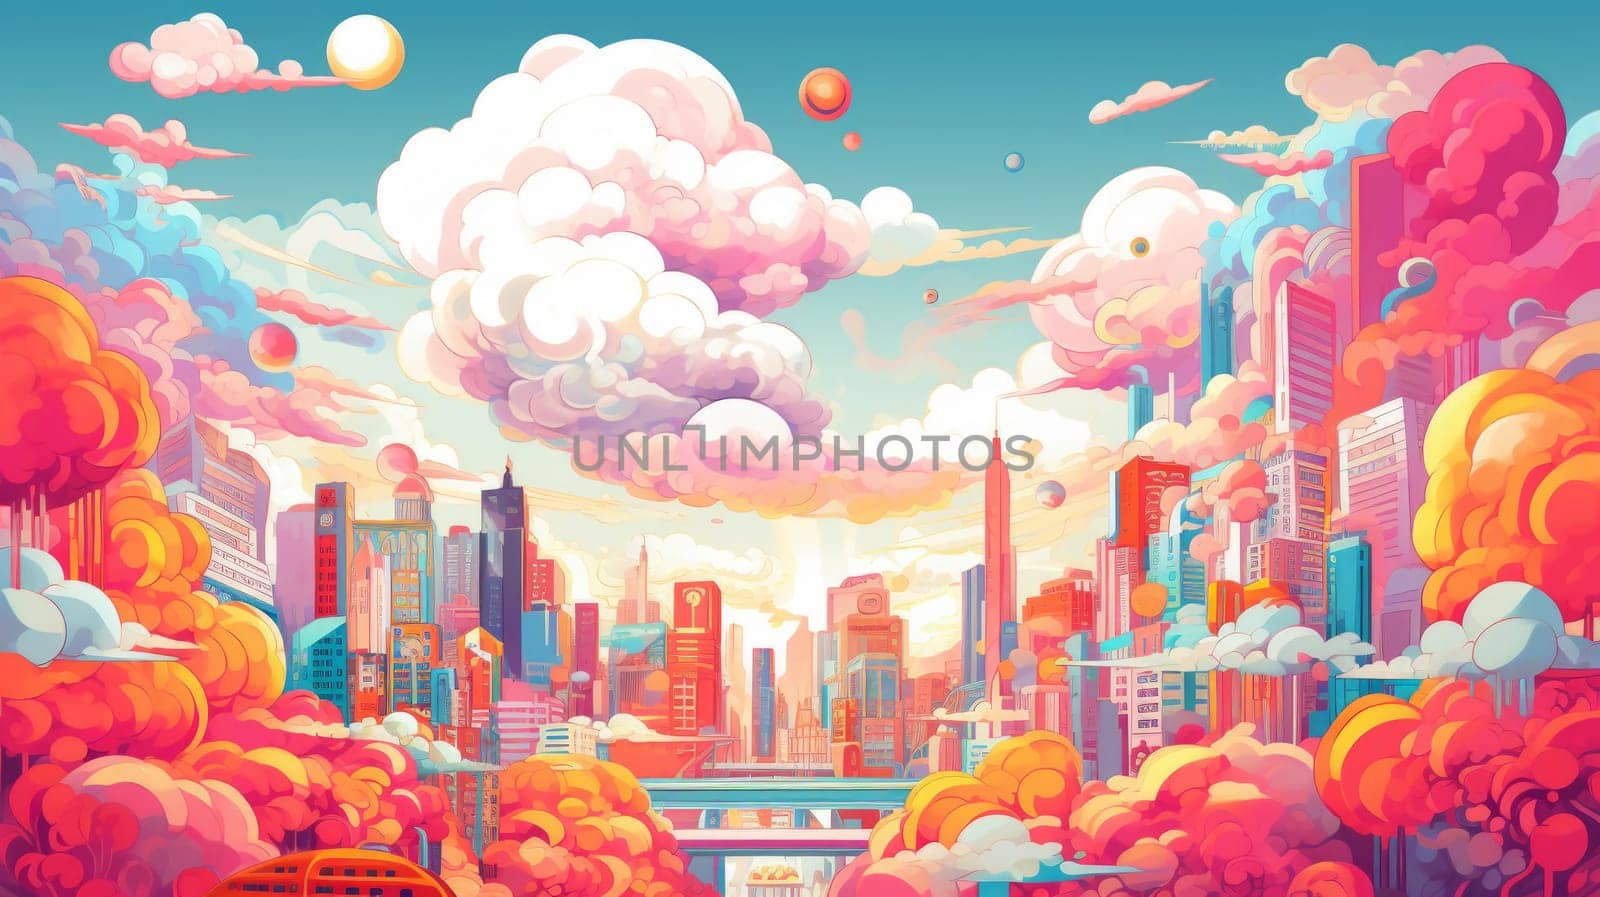 A whimsical cityscape with fluffy clouds and pastel colors creating a serene fantasy world